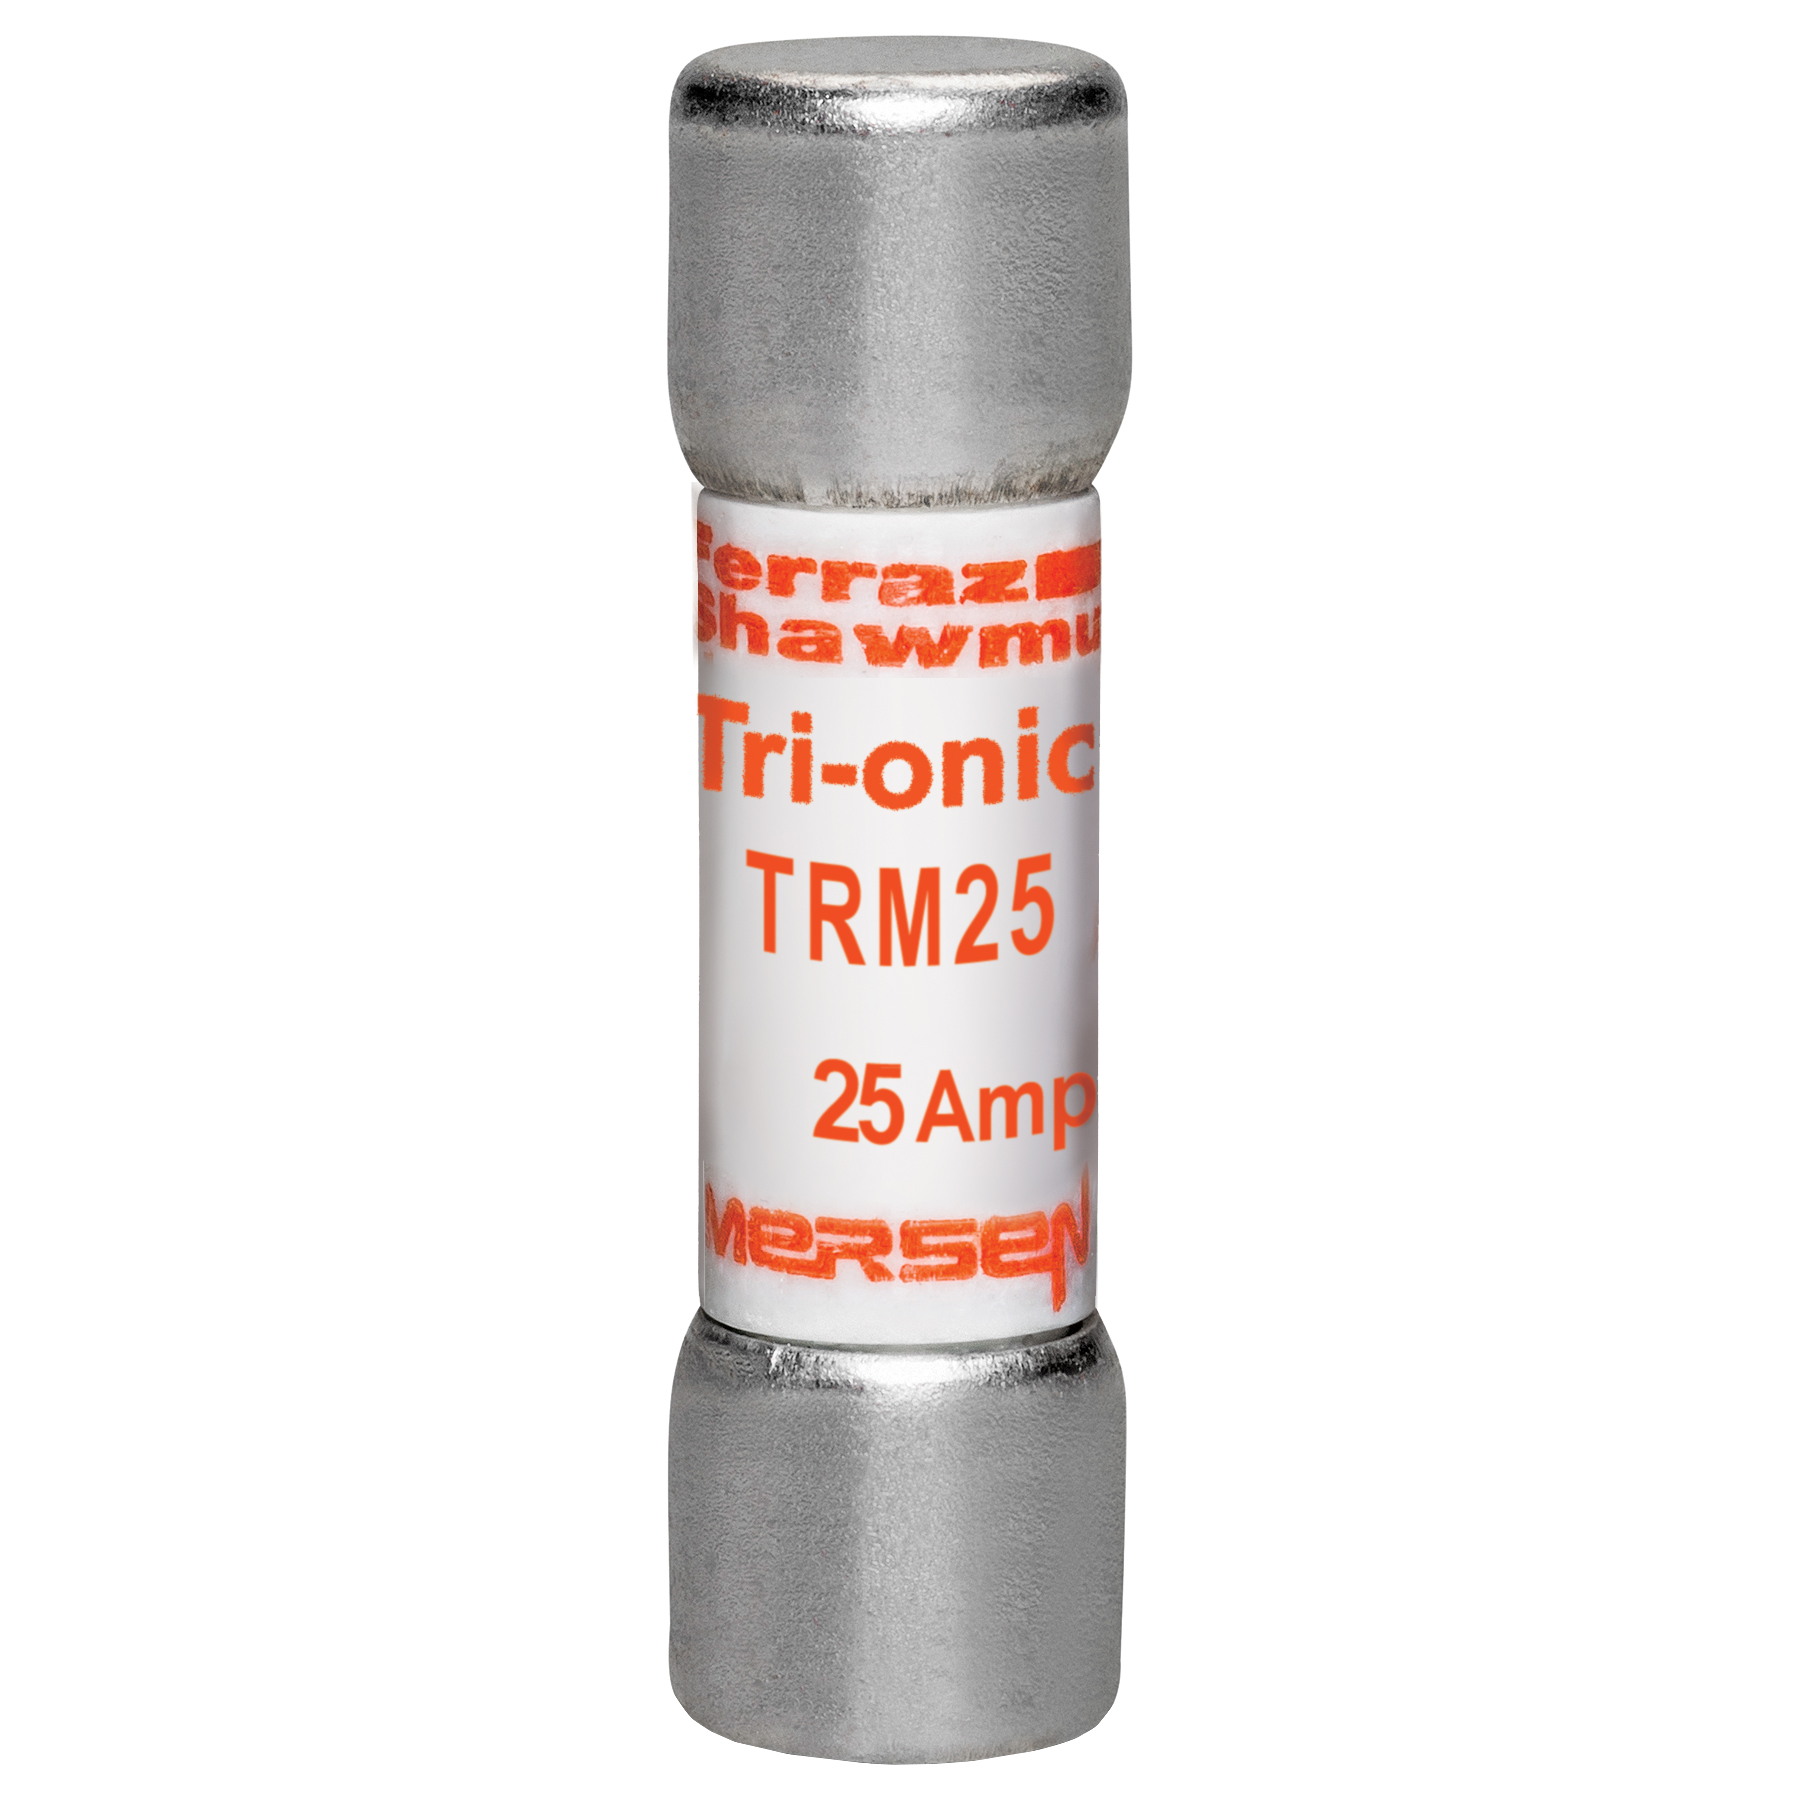 the part number is TRM25